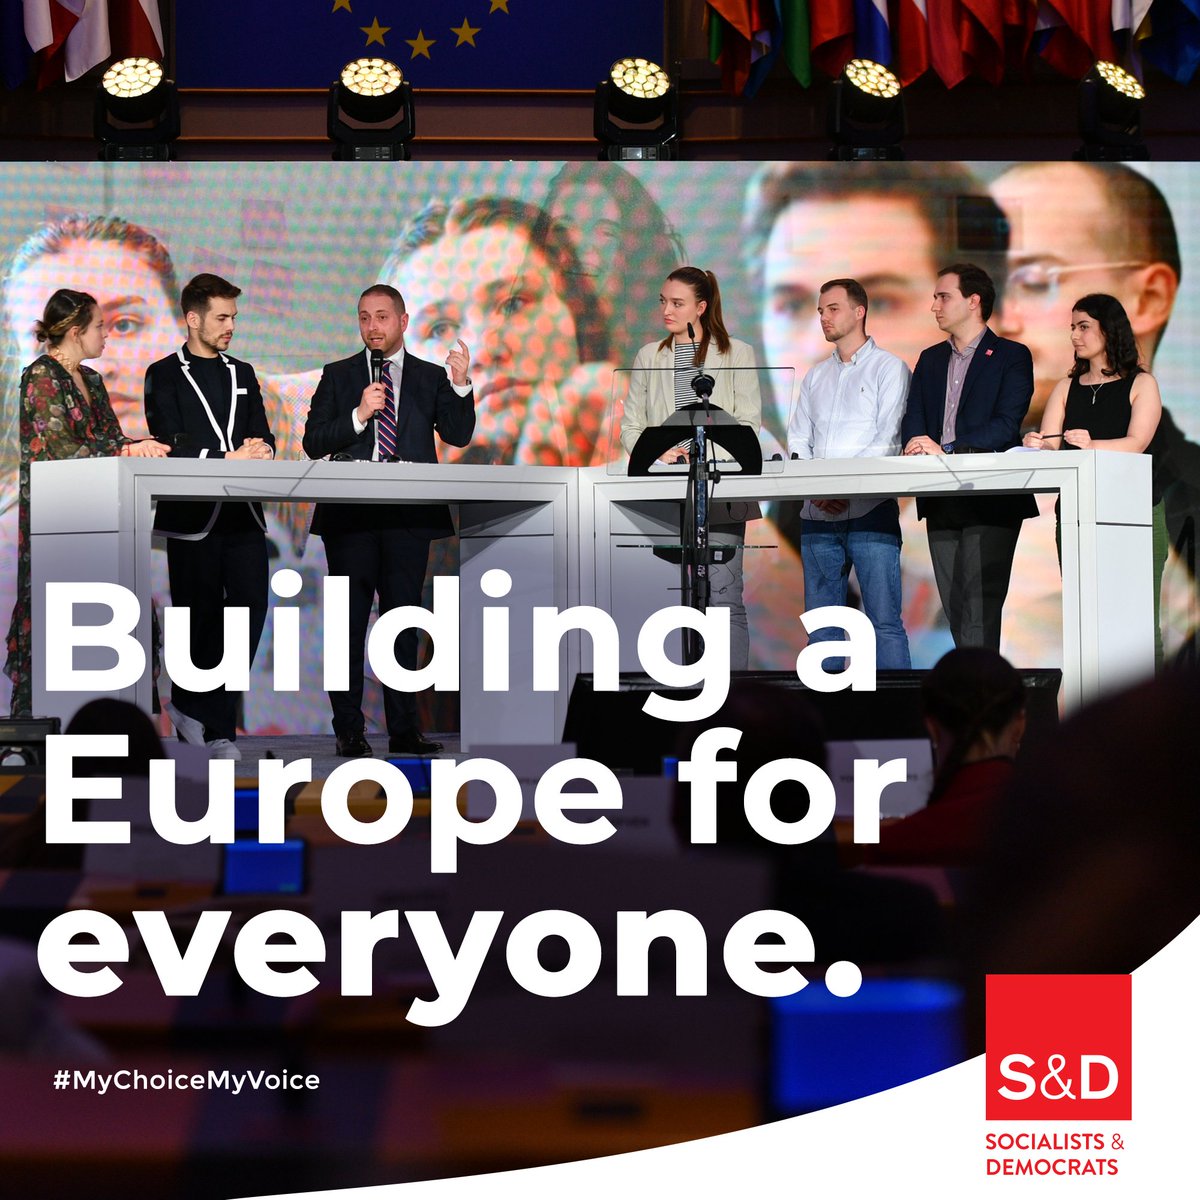 Young people have specific demands for Europe’s leaders today on issues that directly affect them like housing traineeships, fighting climate change, empowering younger voters. But young people also care about building a Europe that works for everyone. #MyChoiceMyVoice